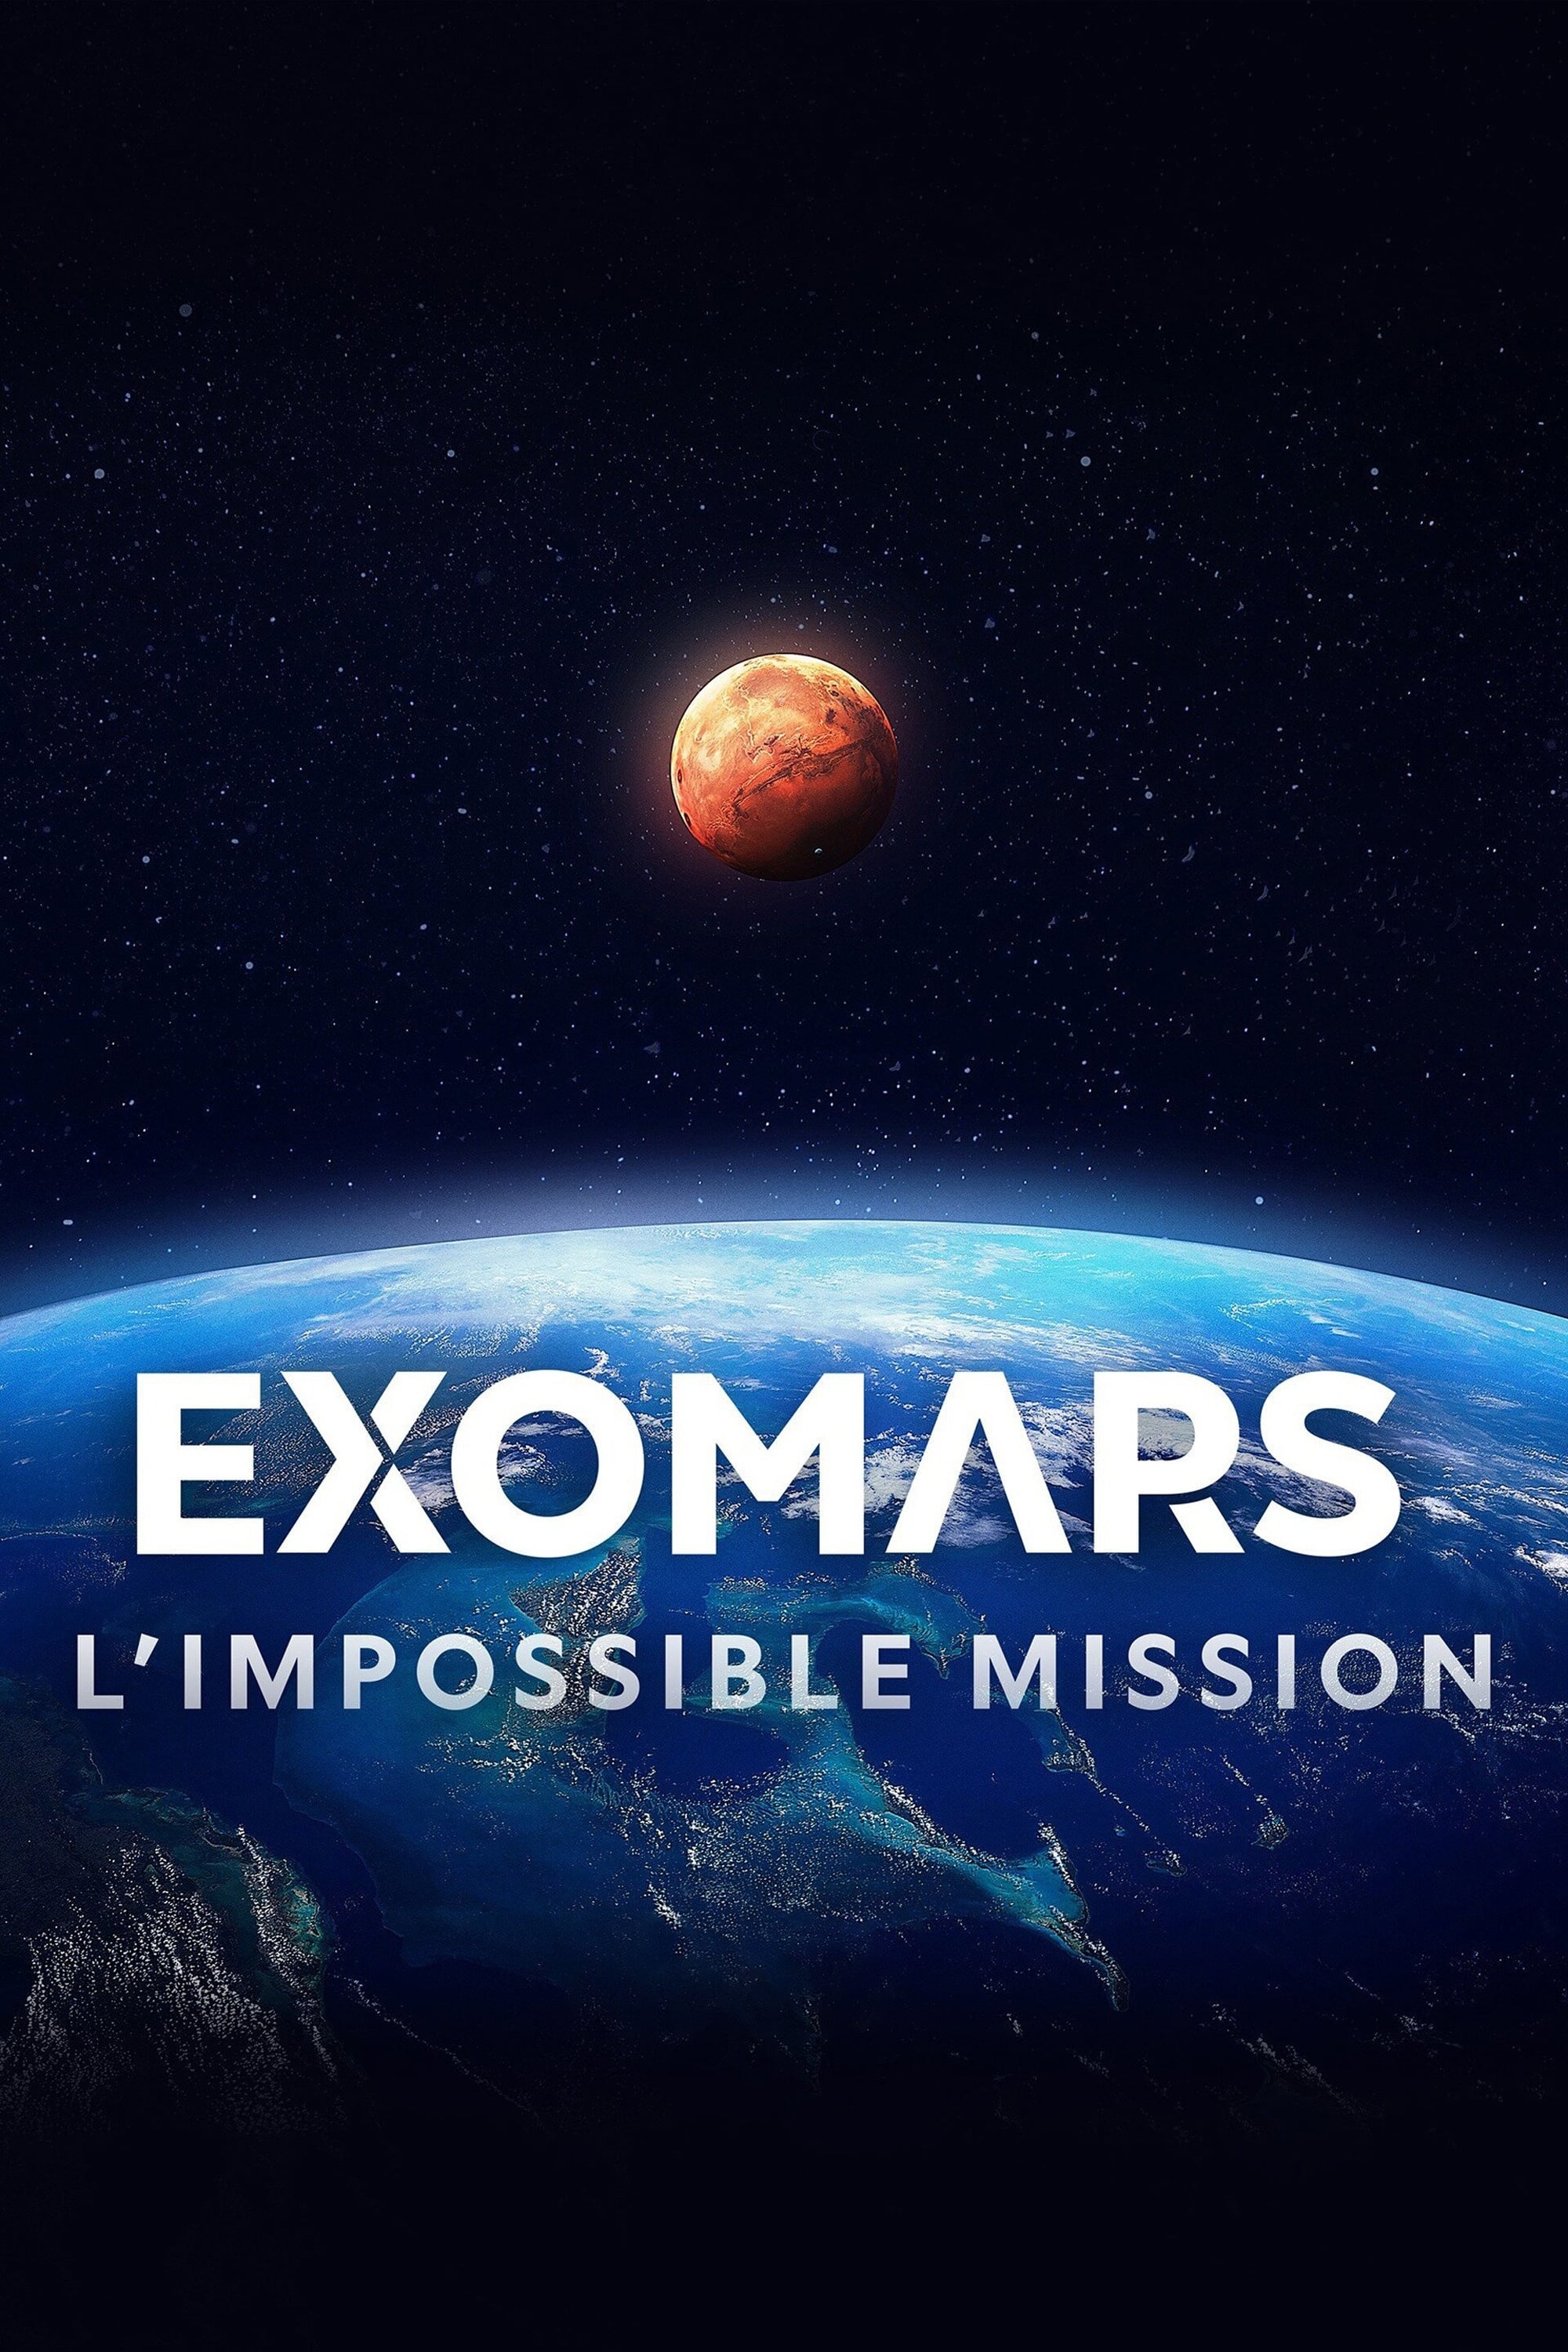 ExoMars: Europe's Imposible Mission